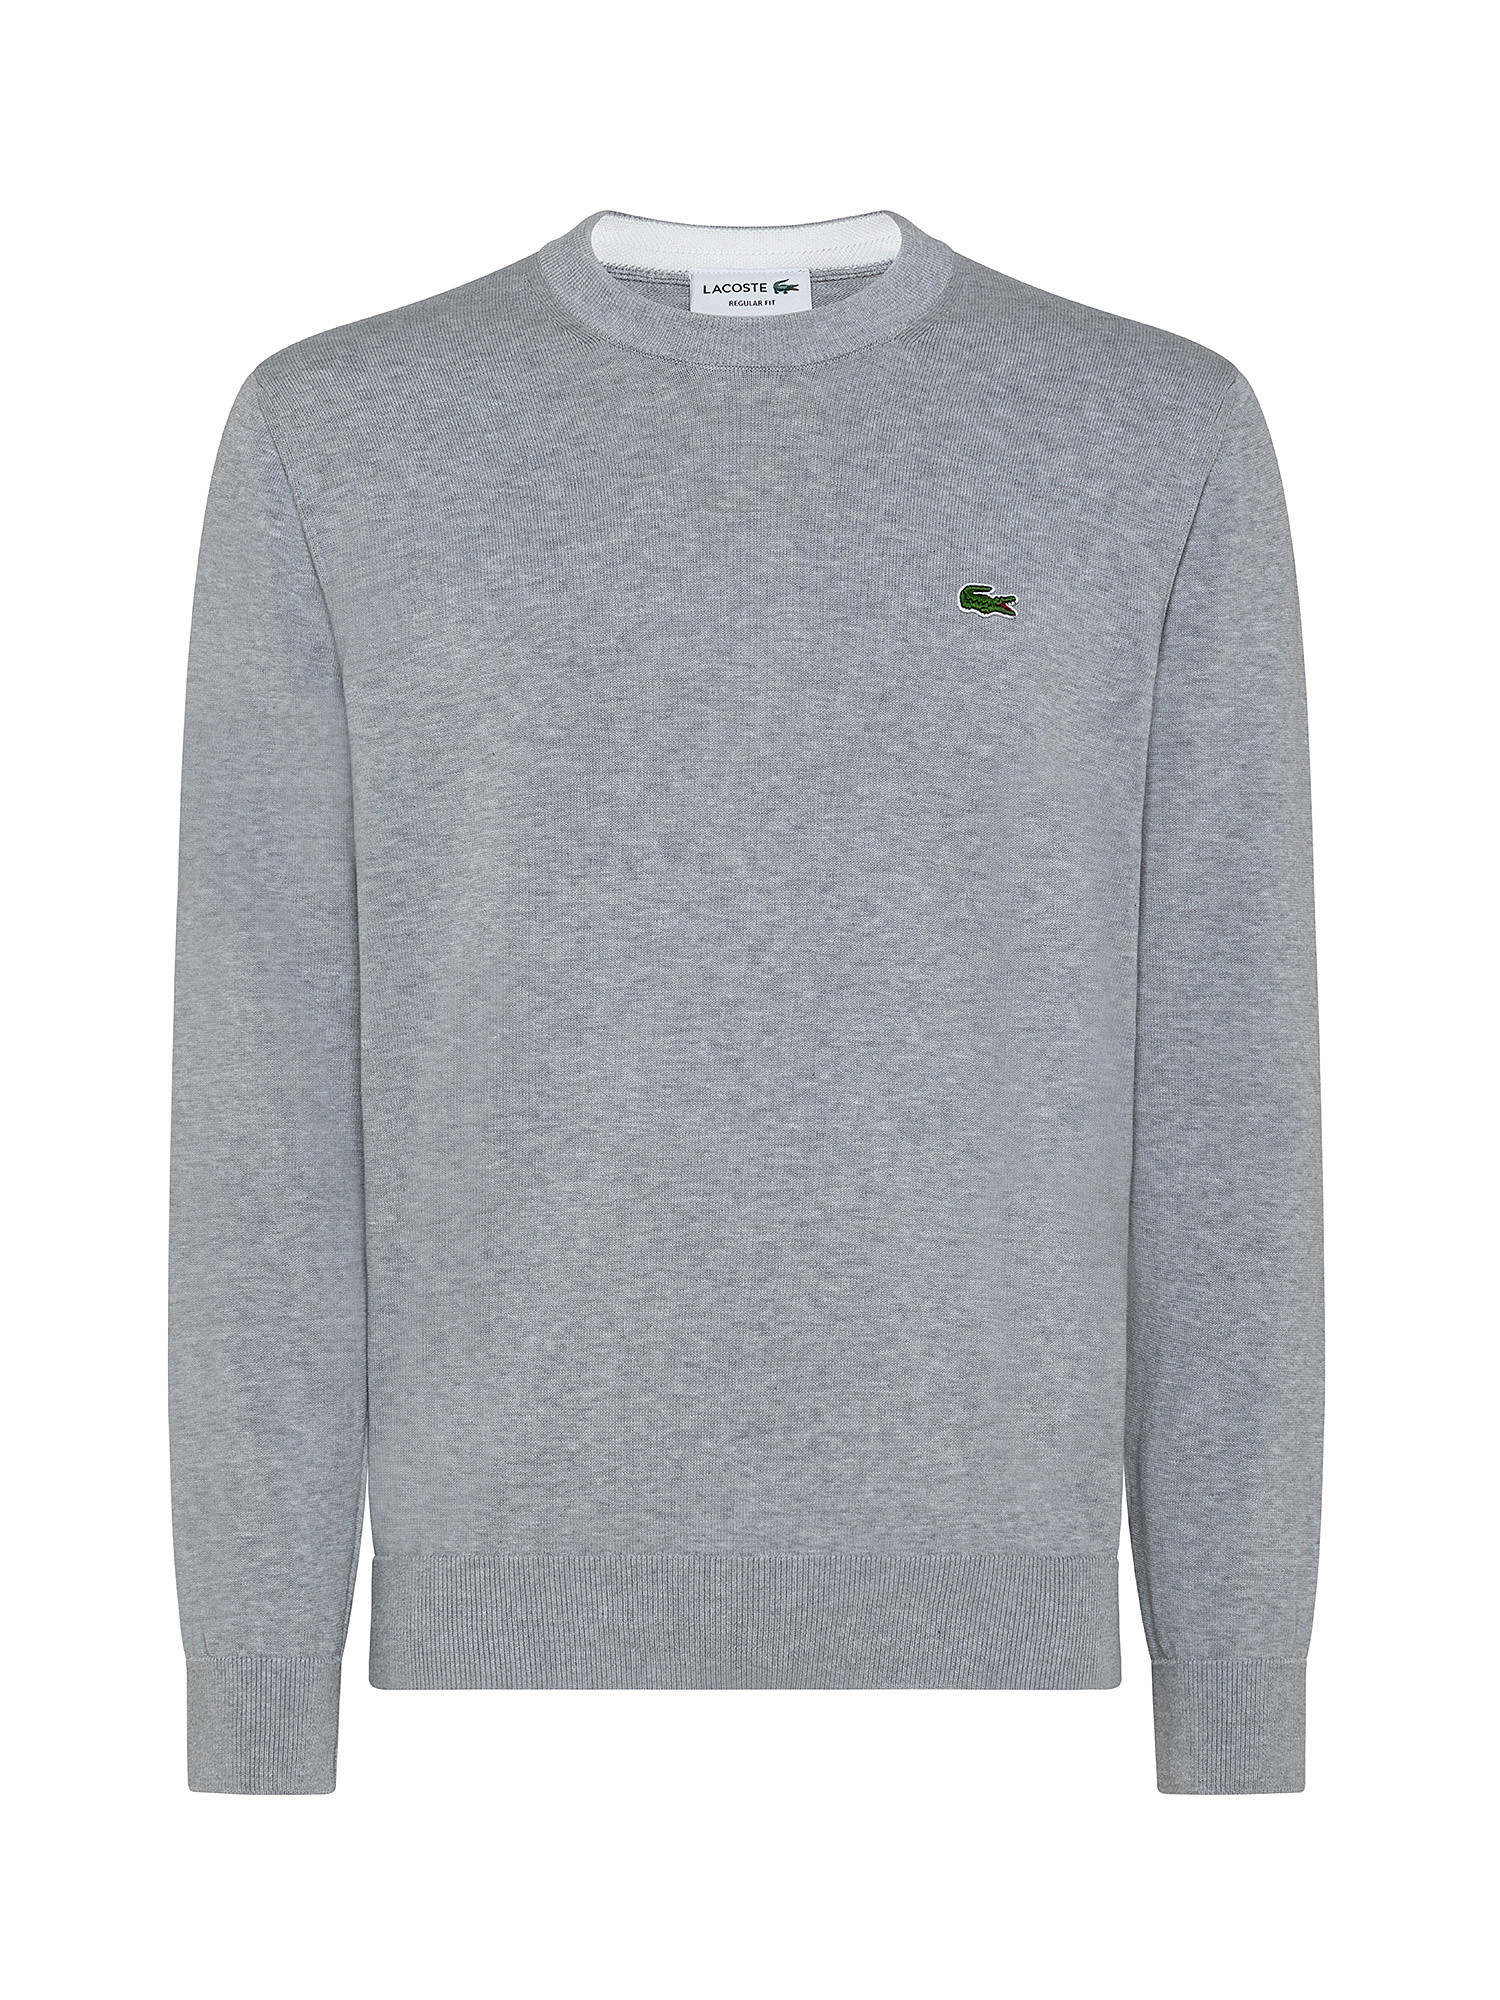 Pullover, Grey, large image number 0